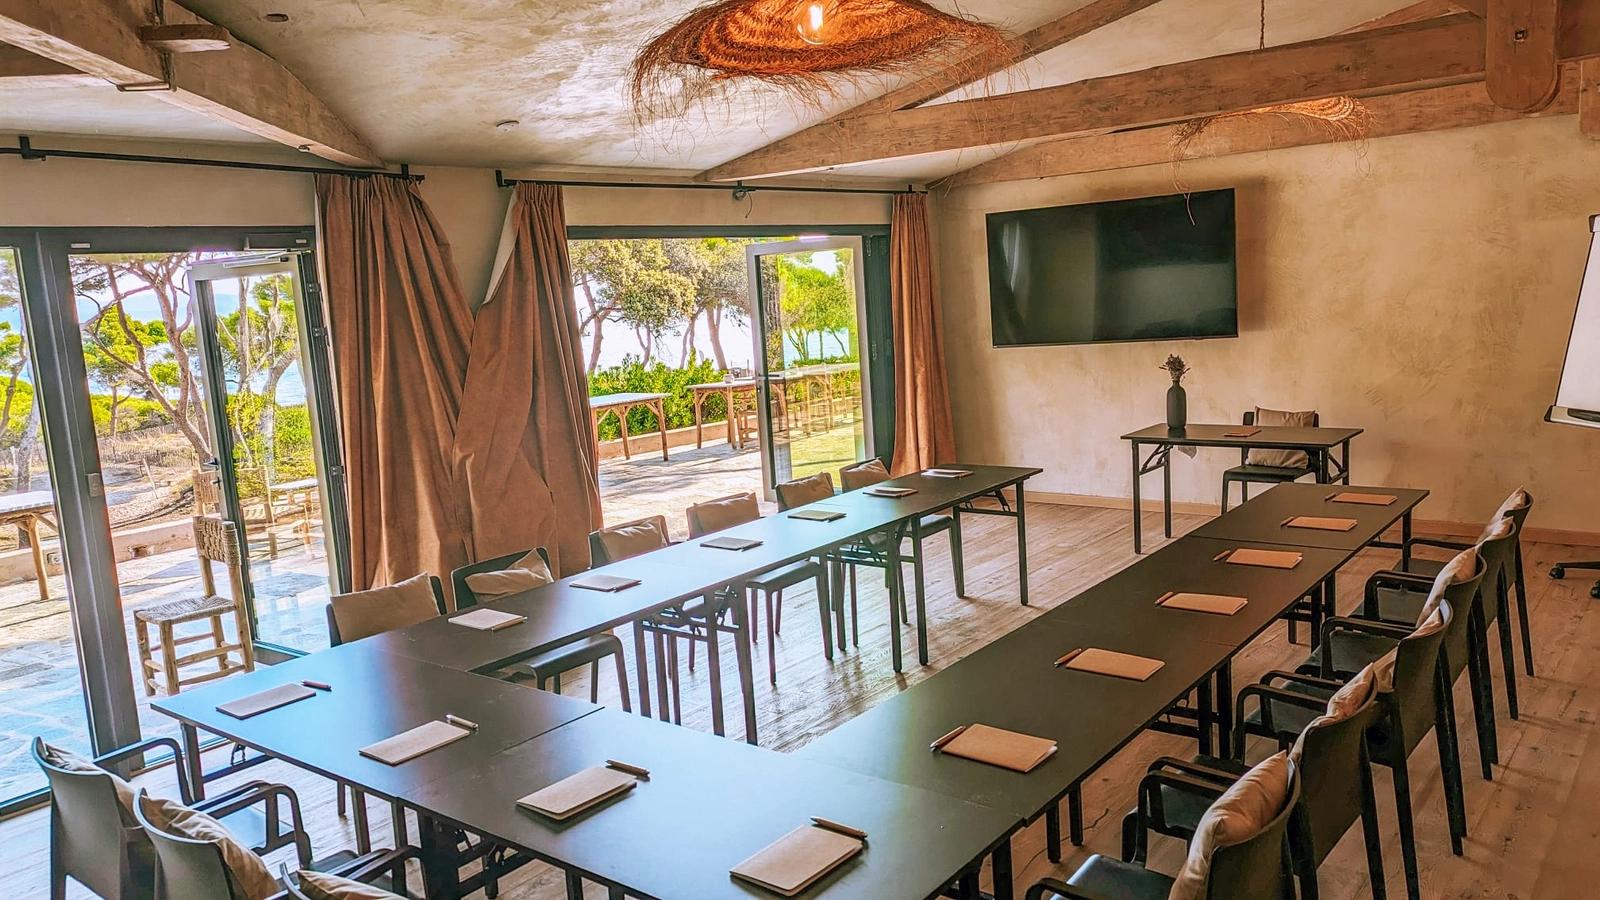 Space Meeting room with sea view terrace - 2